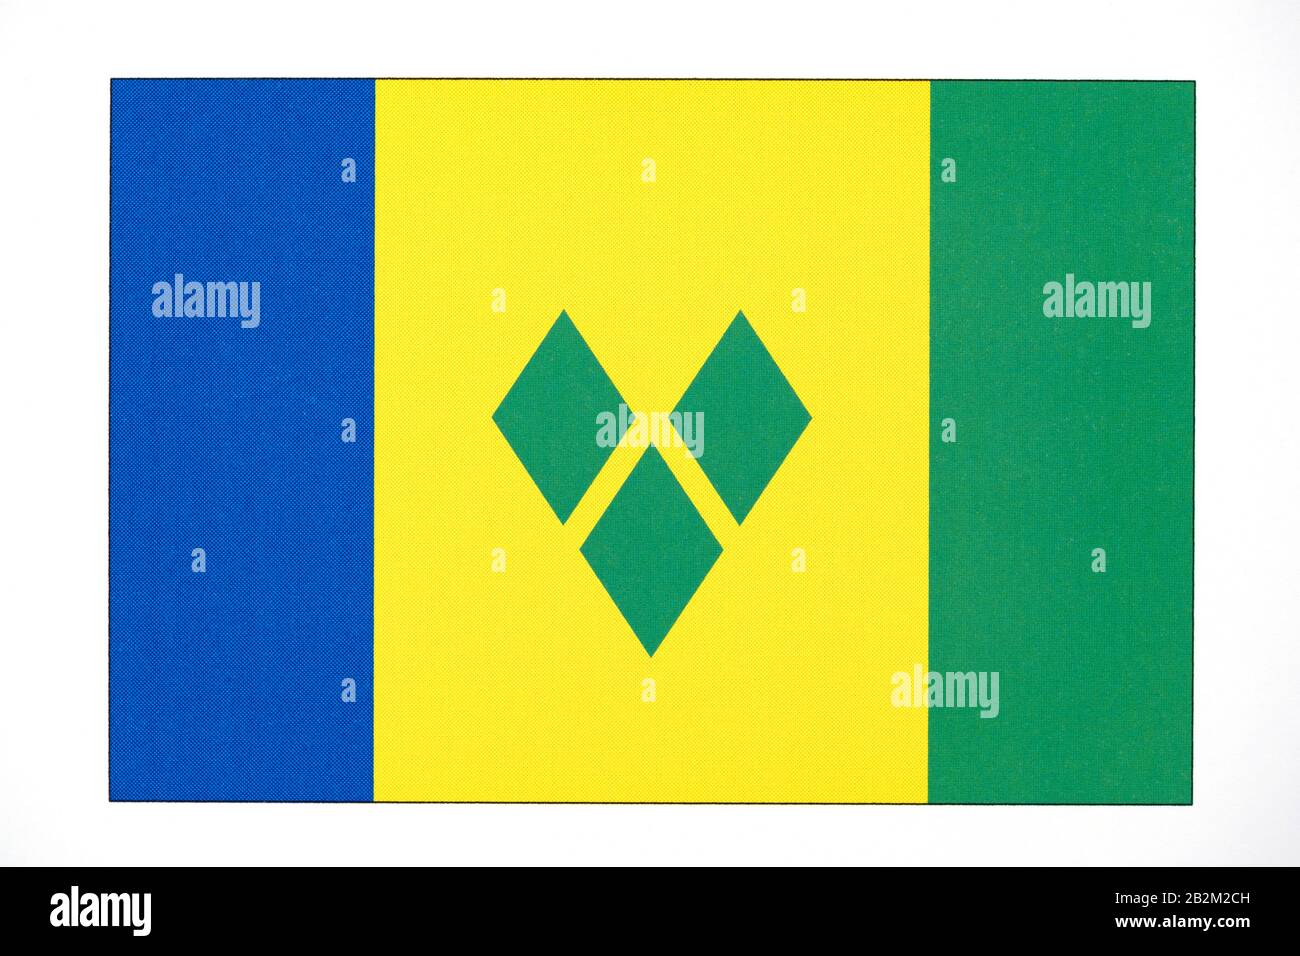 National flag of St Vincent And The Grenadines. Stock Photo